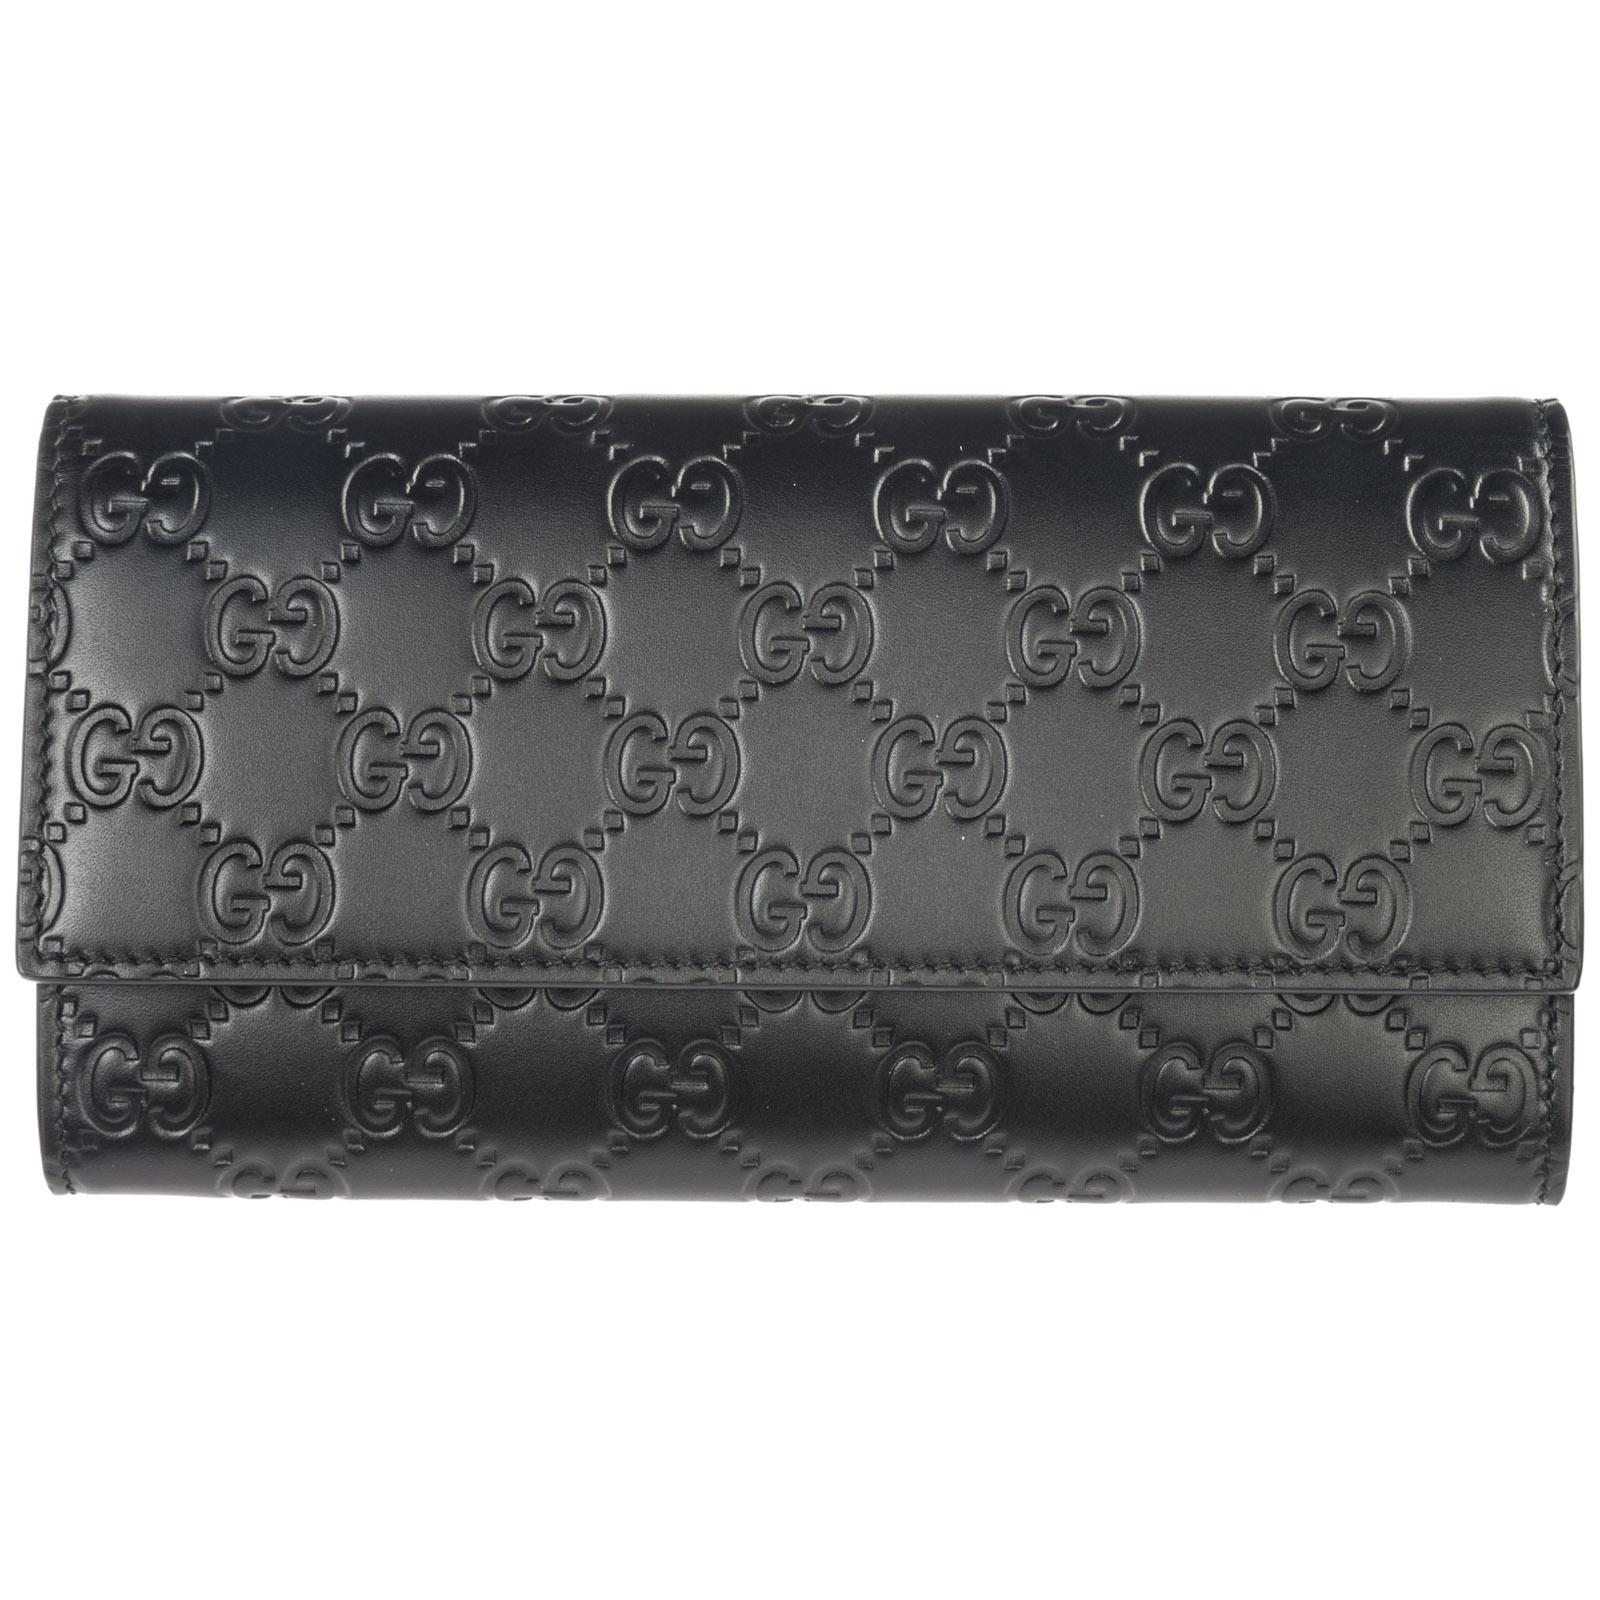 Gucci Wallet Genuine Leather Coin Case Holder Purse Card Bifold in Nero (Black) - Lyst